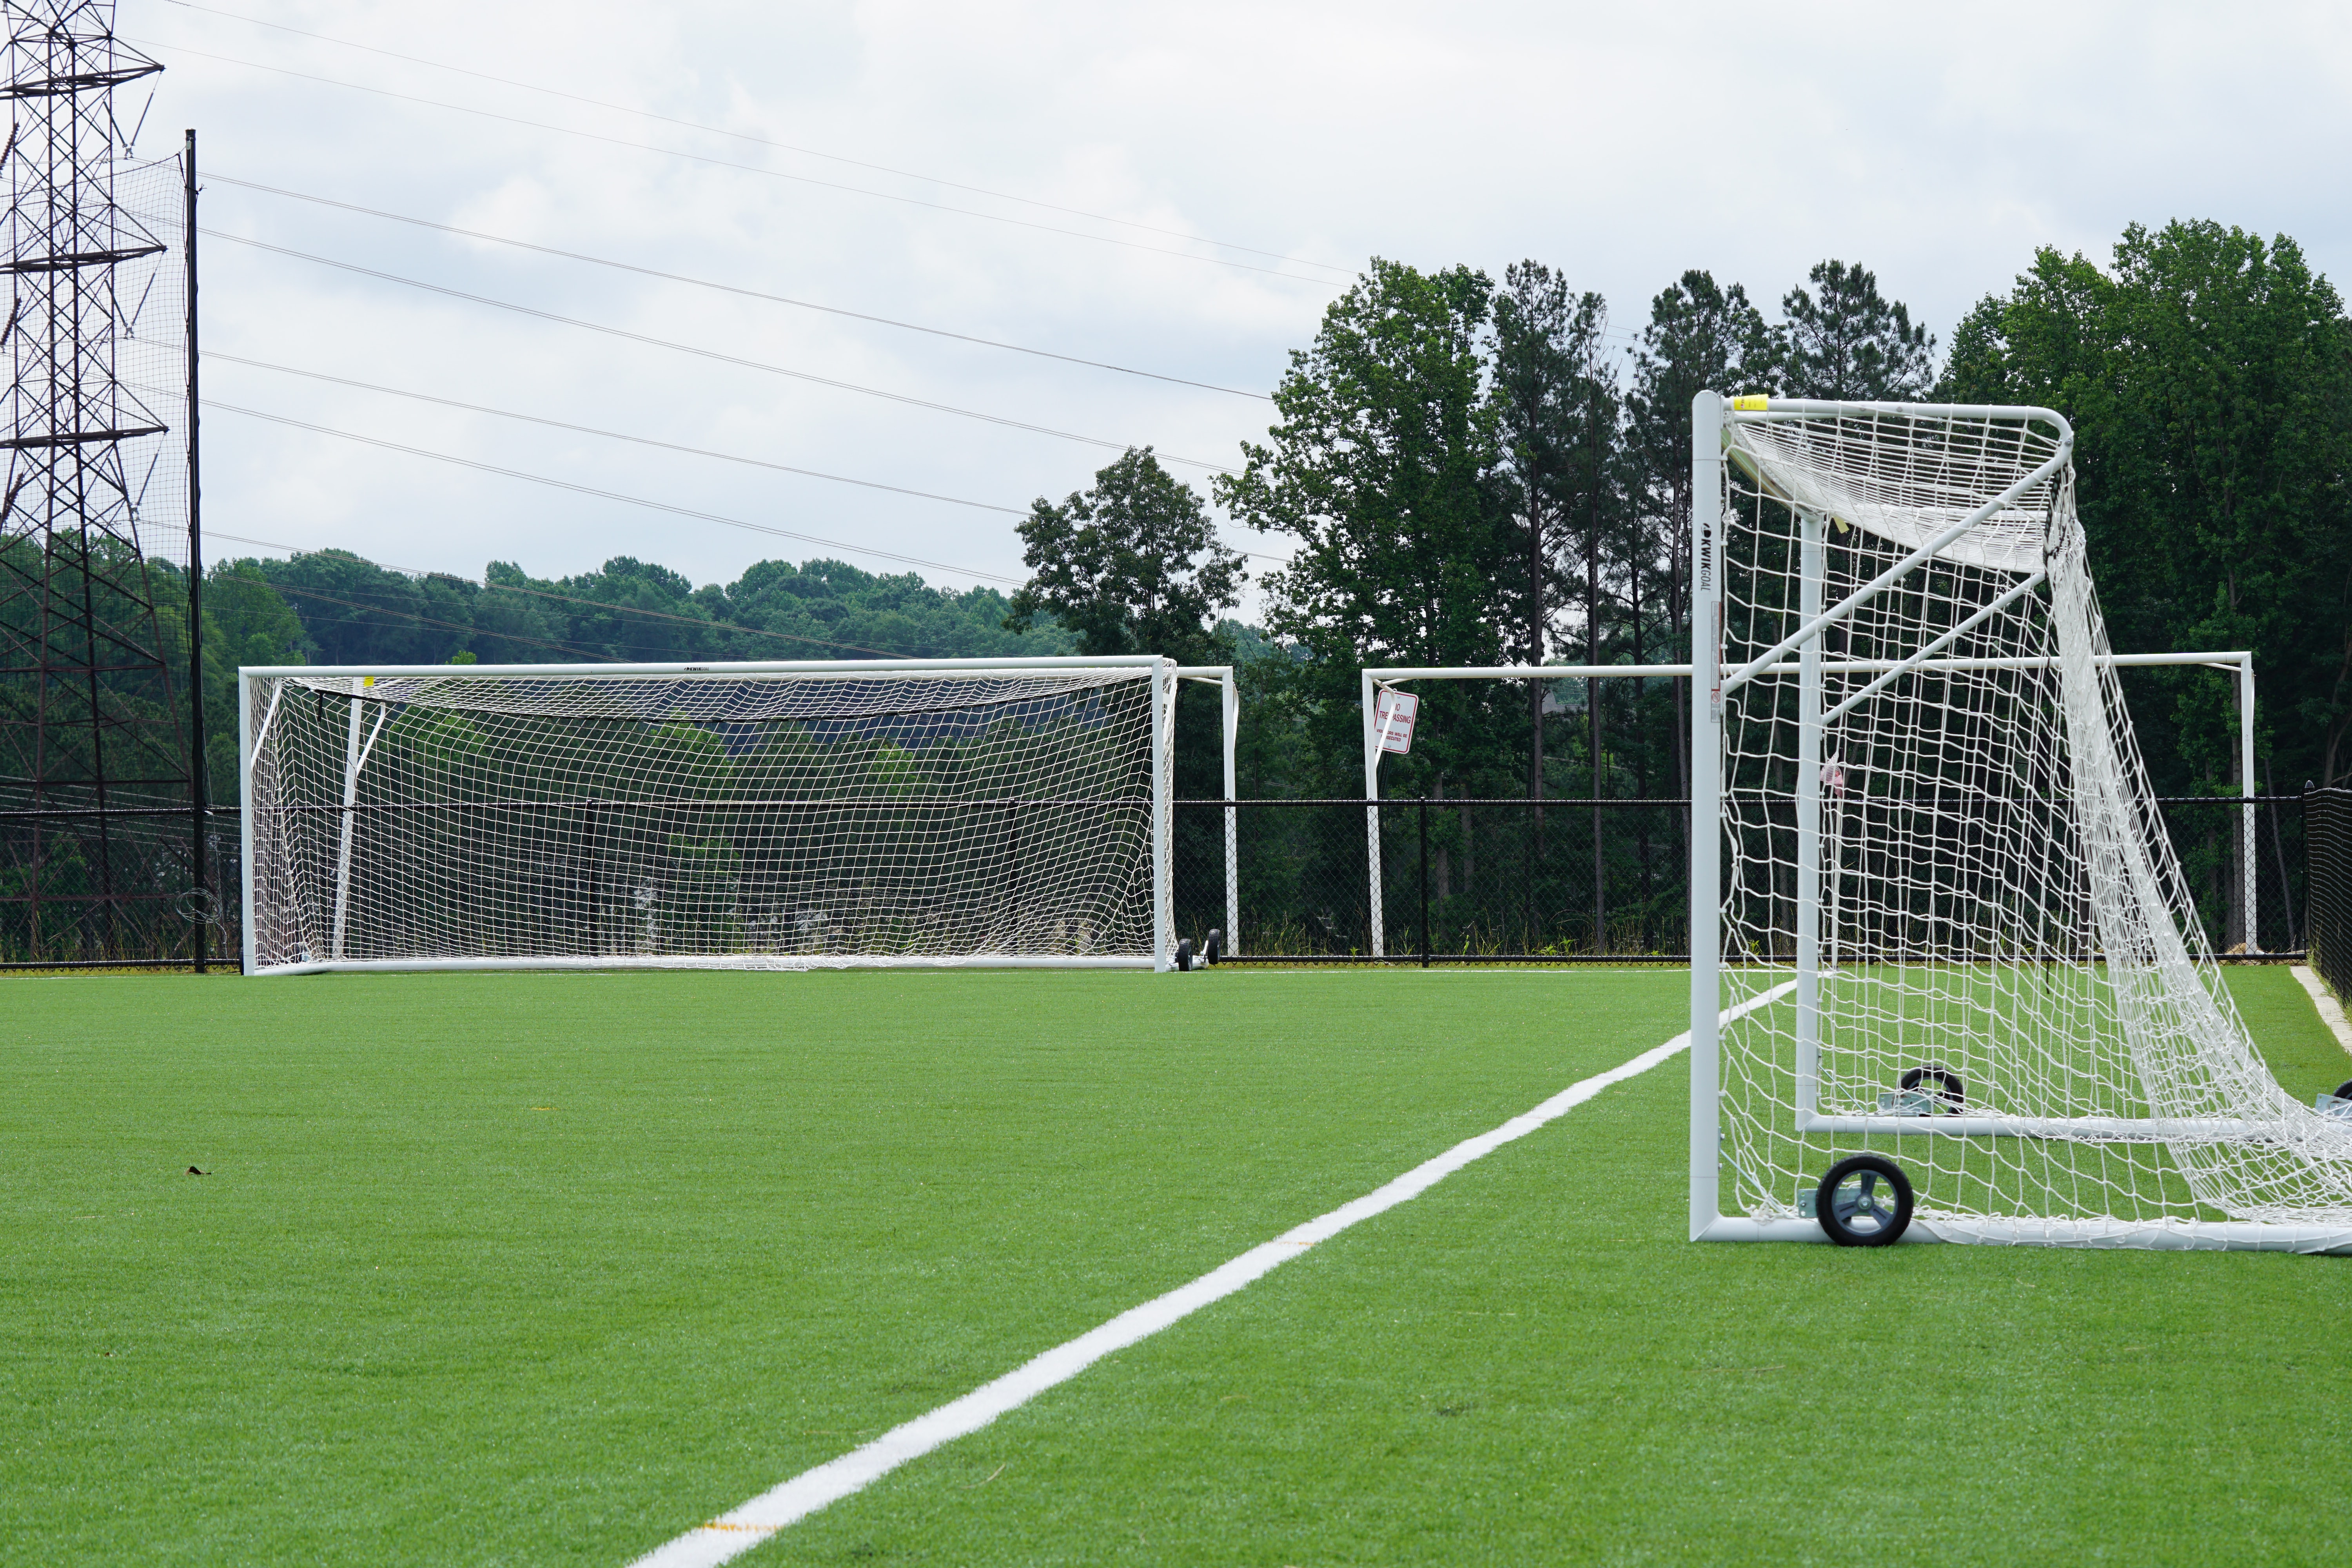 Full Field type of soccer field at 400 per hour